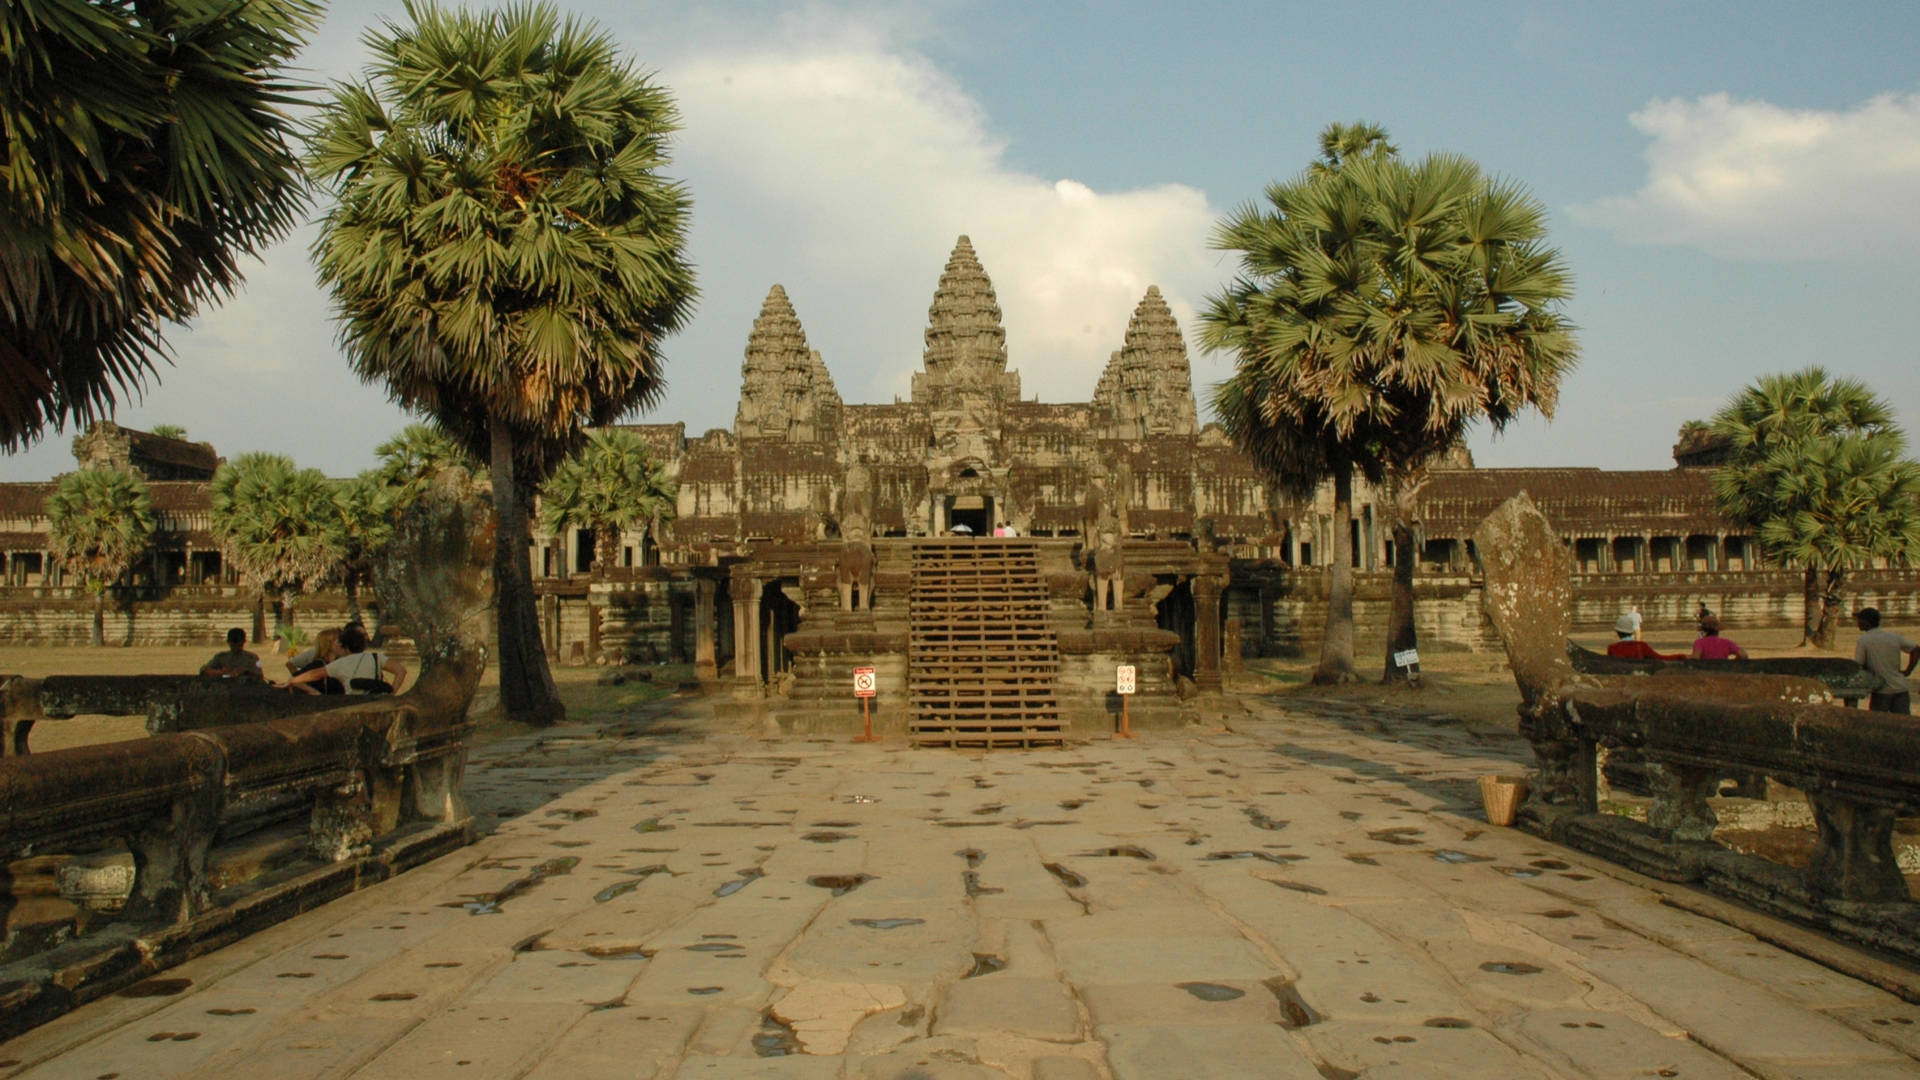 Angkor Wat With Trees By The Road Background